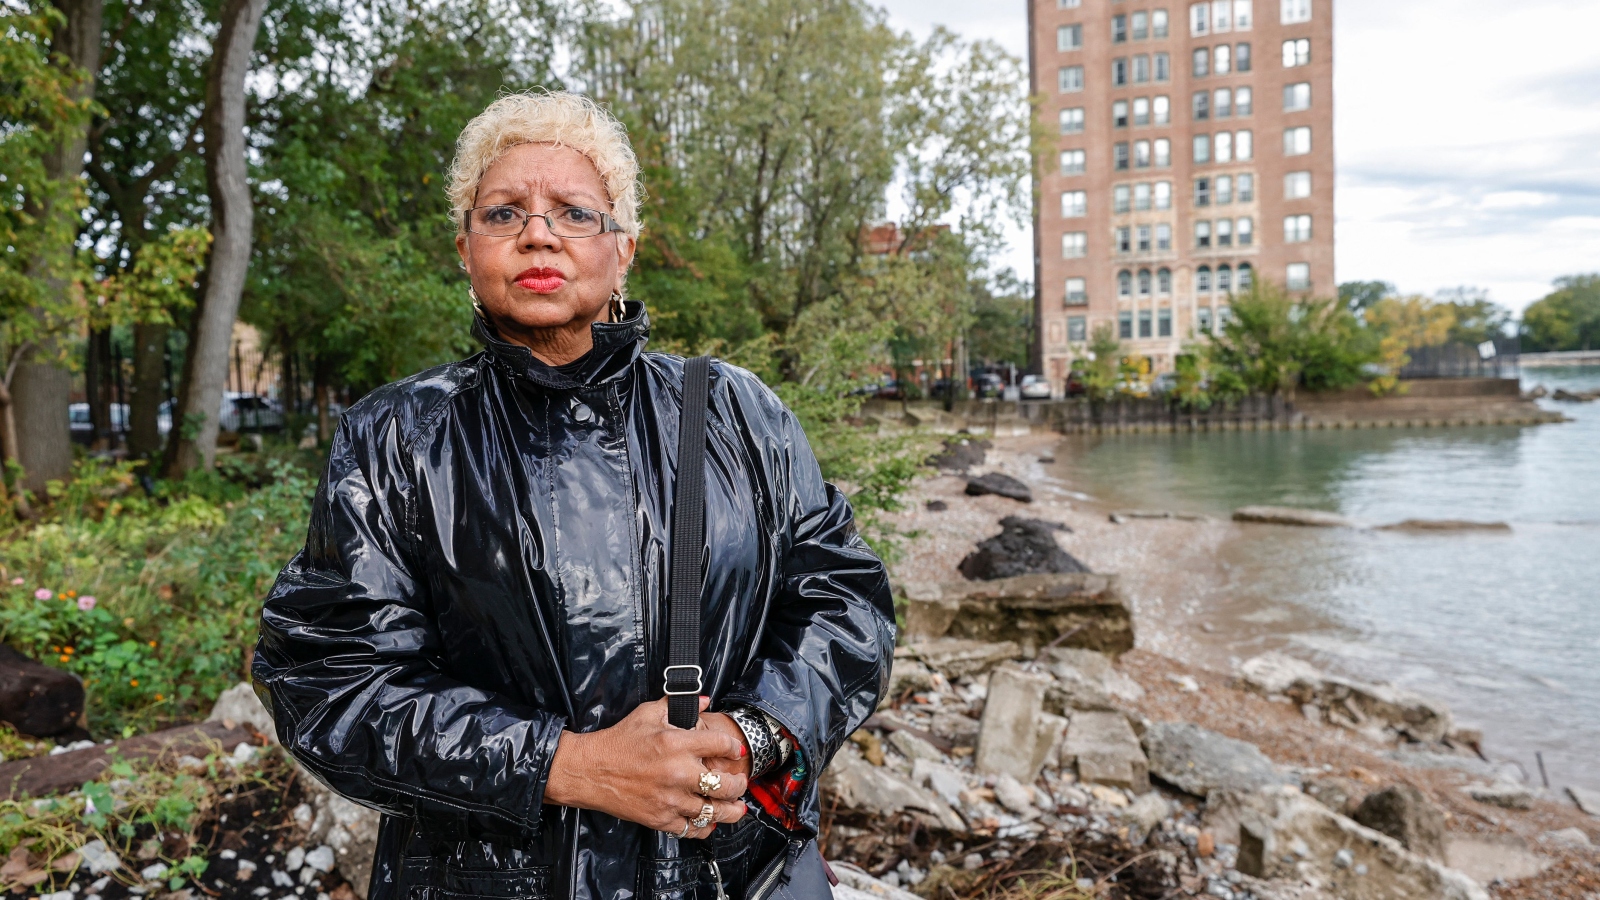 Jera Slaughter, a resident of South Shore in Chicago, looks at the camera as the lake inches closer to her building in the background. She's been central in the fight to protect her neighborhood in Chicago from rising lakewaters.